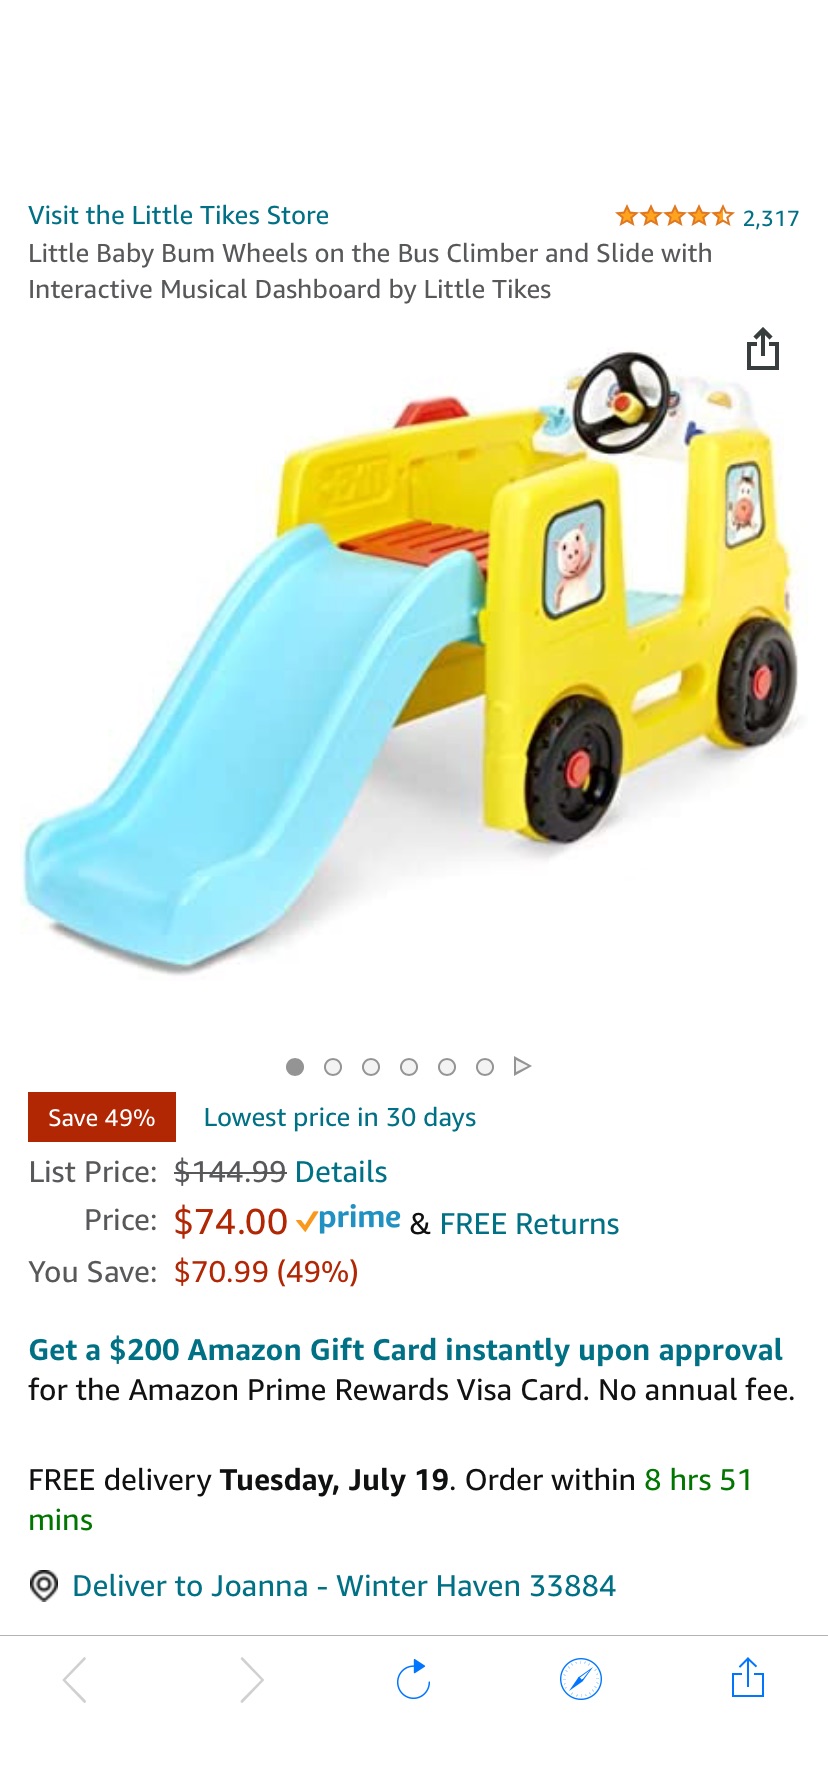 Amazon.com: Little Baby Bum Wheels on the Bus Climber and Slide with Interactive Musical Dashboard by Little Tikes : Toys & Games室内滑梯